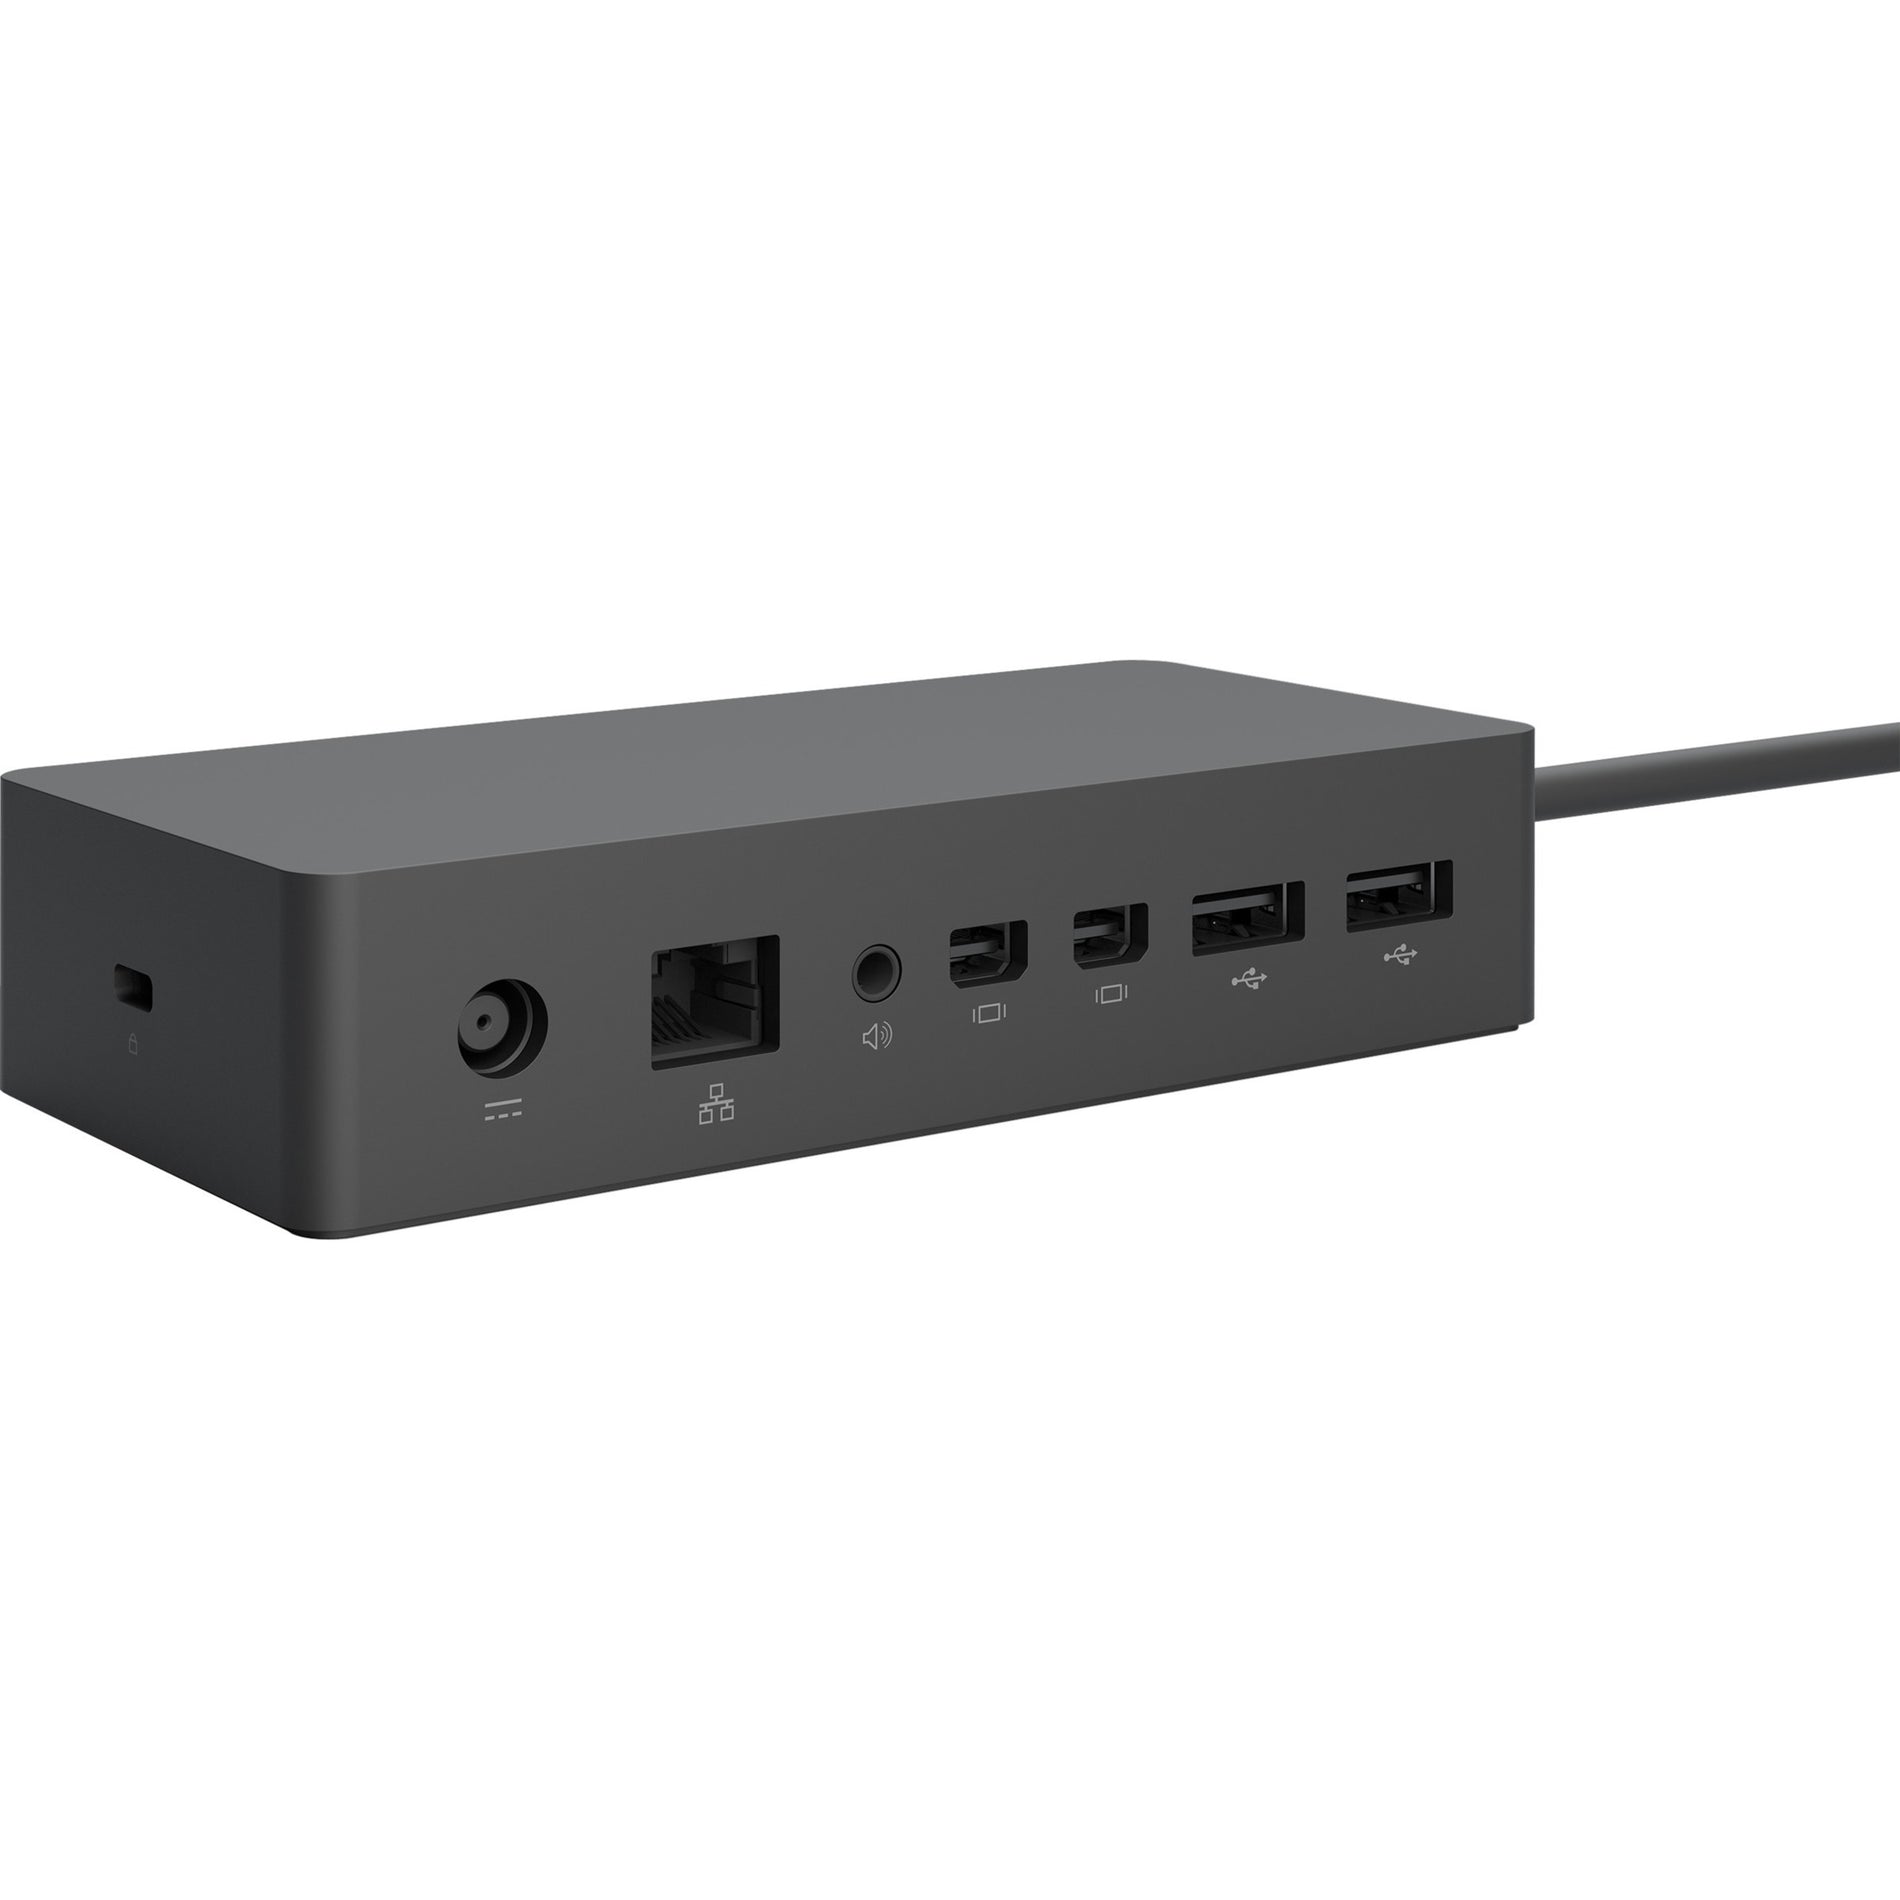 Microsoft PF3-00005 Surface Dock, USB 3.0 Docking Station with DisplayPort, Audio Line Out, and 4 USB 3.0 Ports